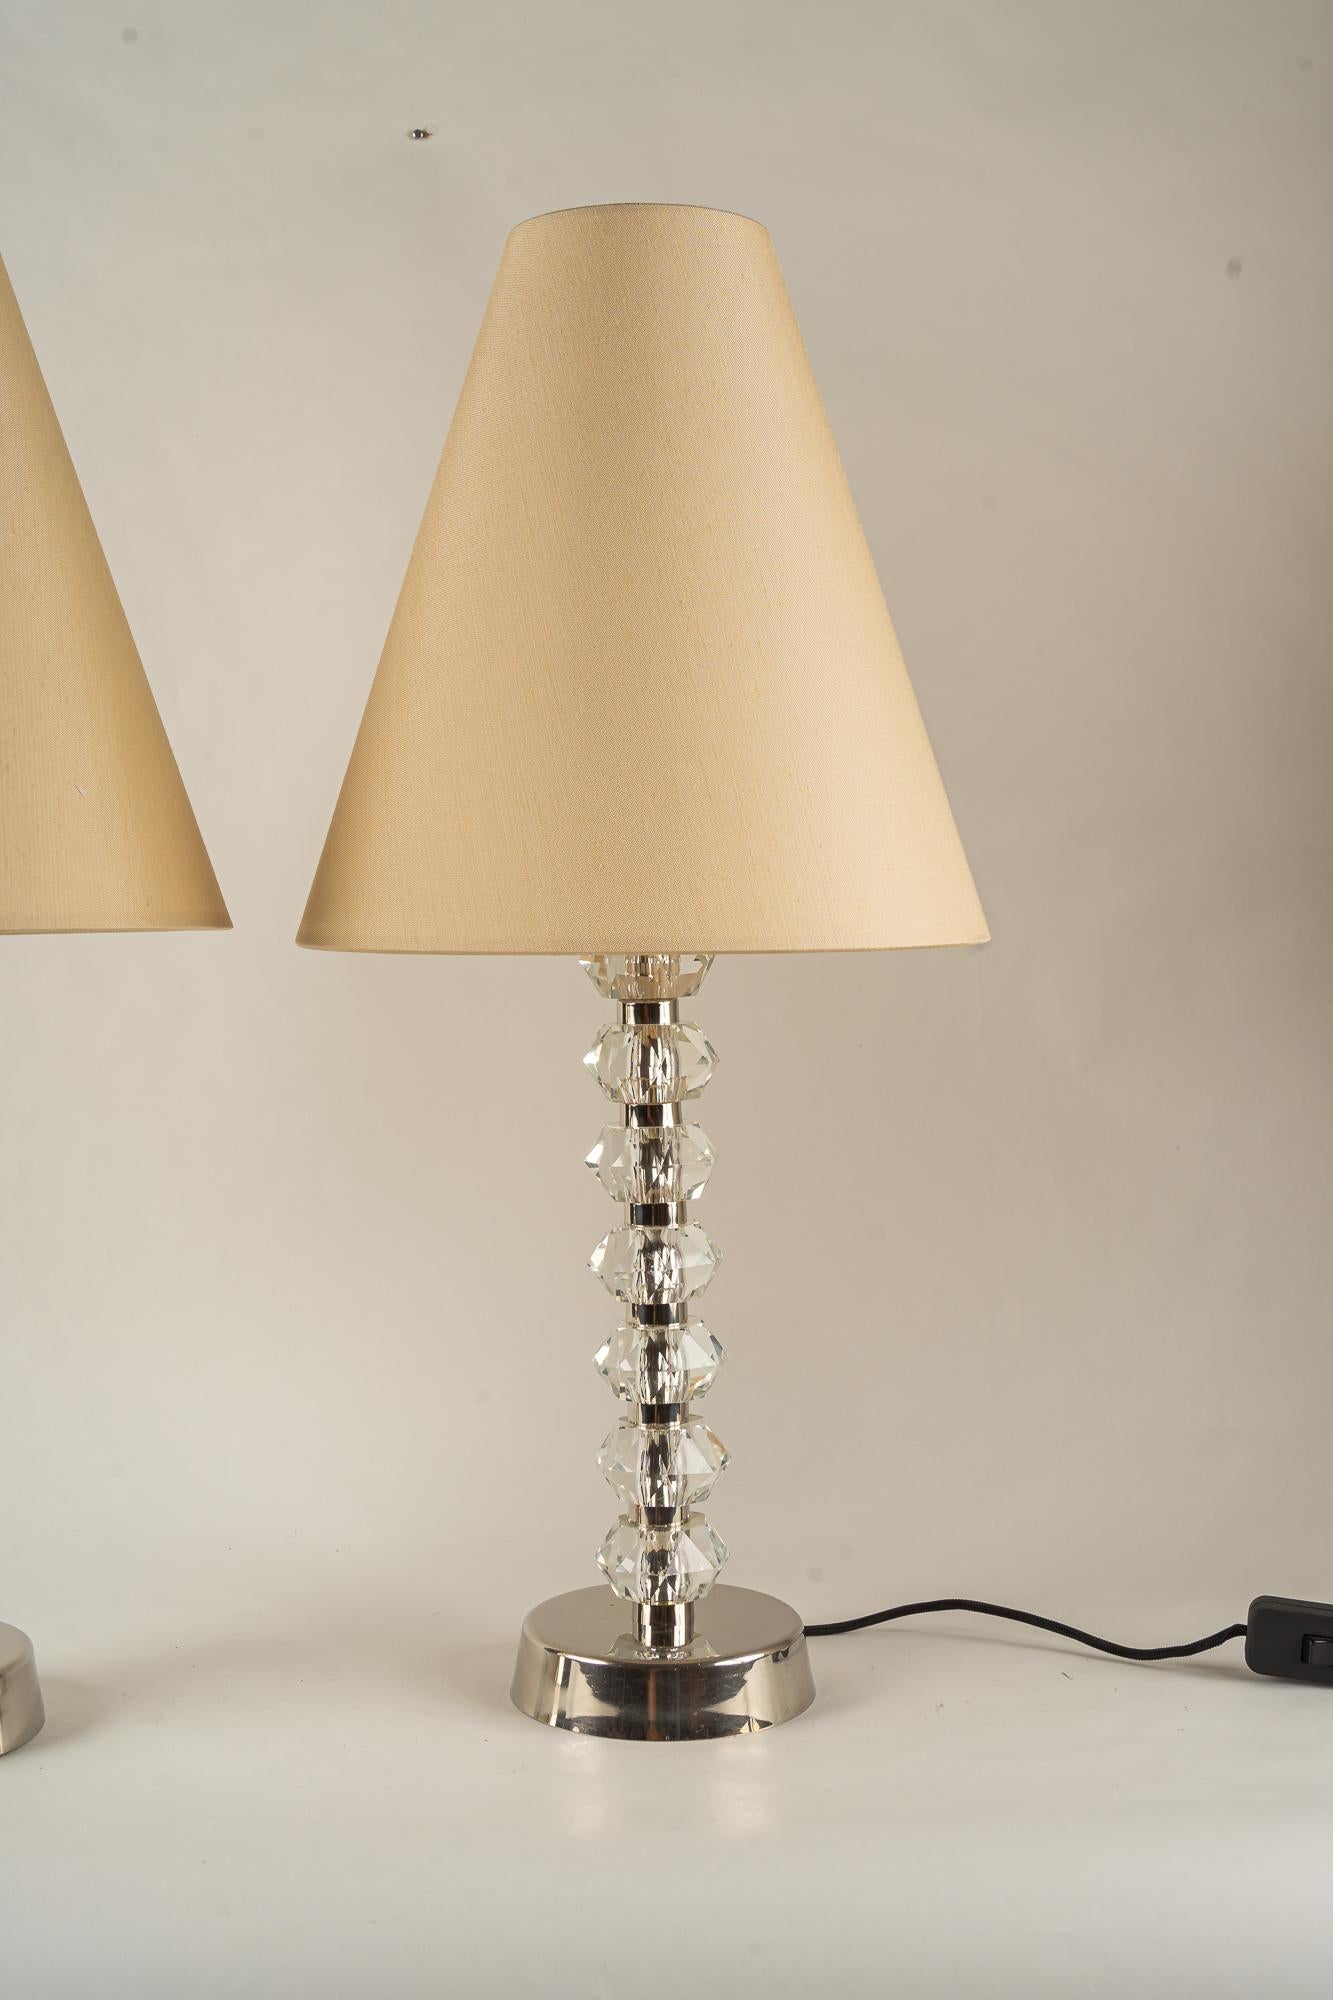 Two Bakalowits table lamps around 1960s
Original condition
The shade is replaced ( new ).